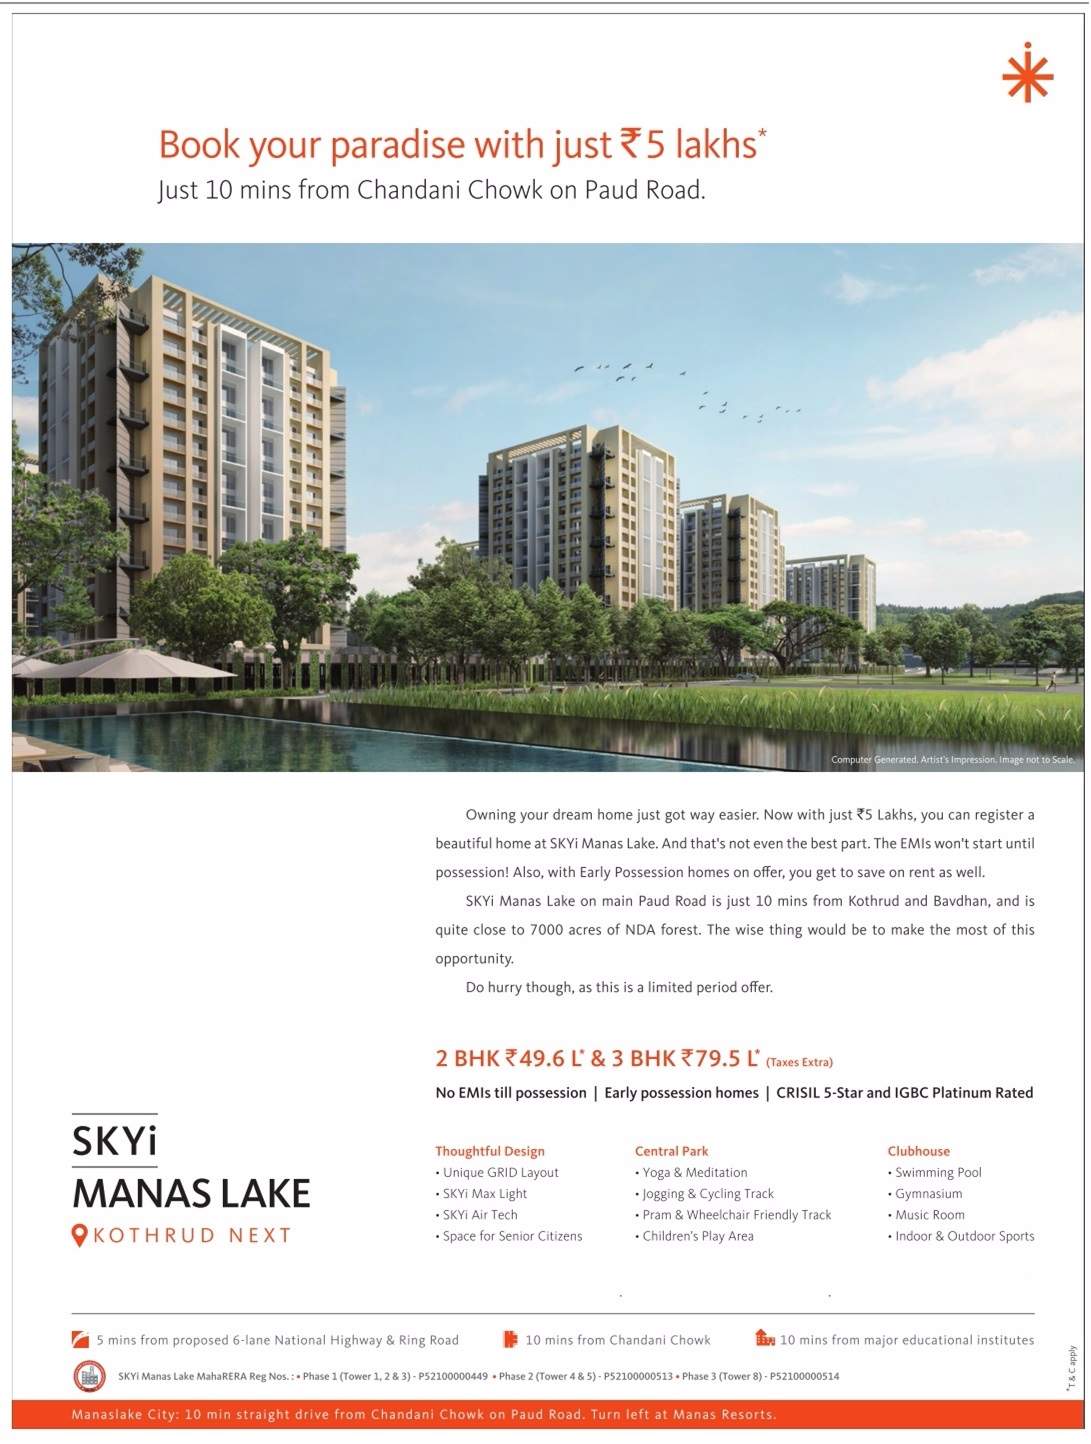 Book your paradise with just Rs. 5 Iakhs at SkYi Manas Lake in Pune